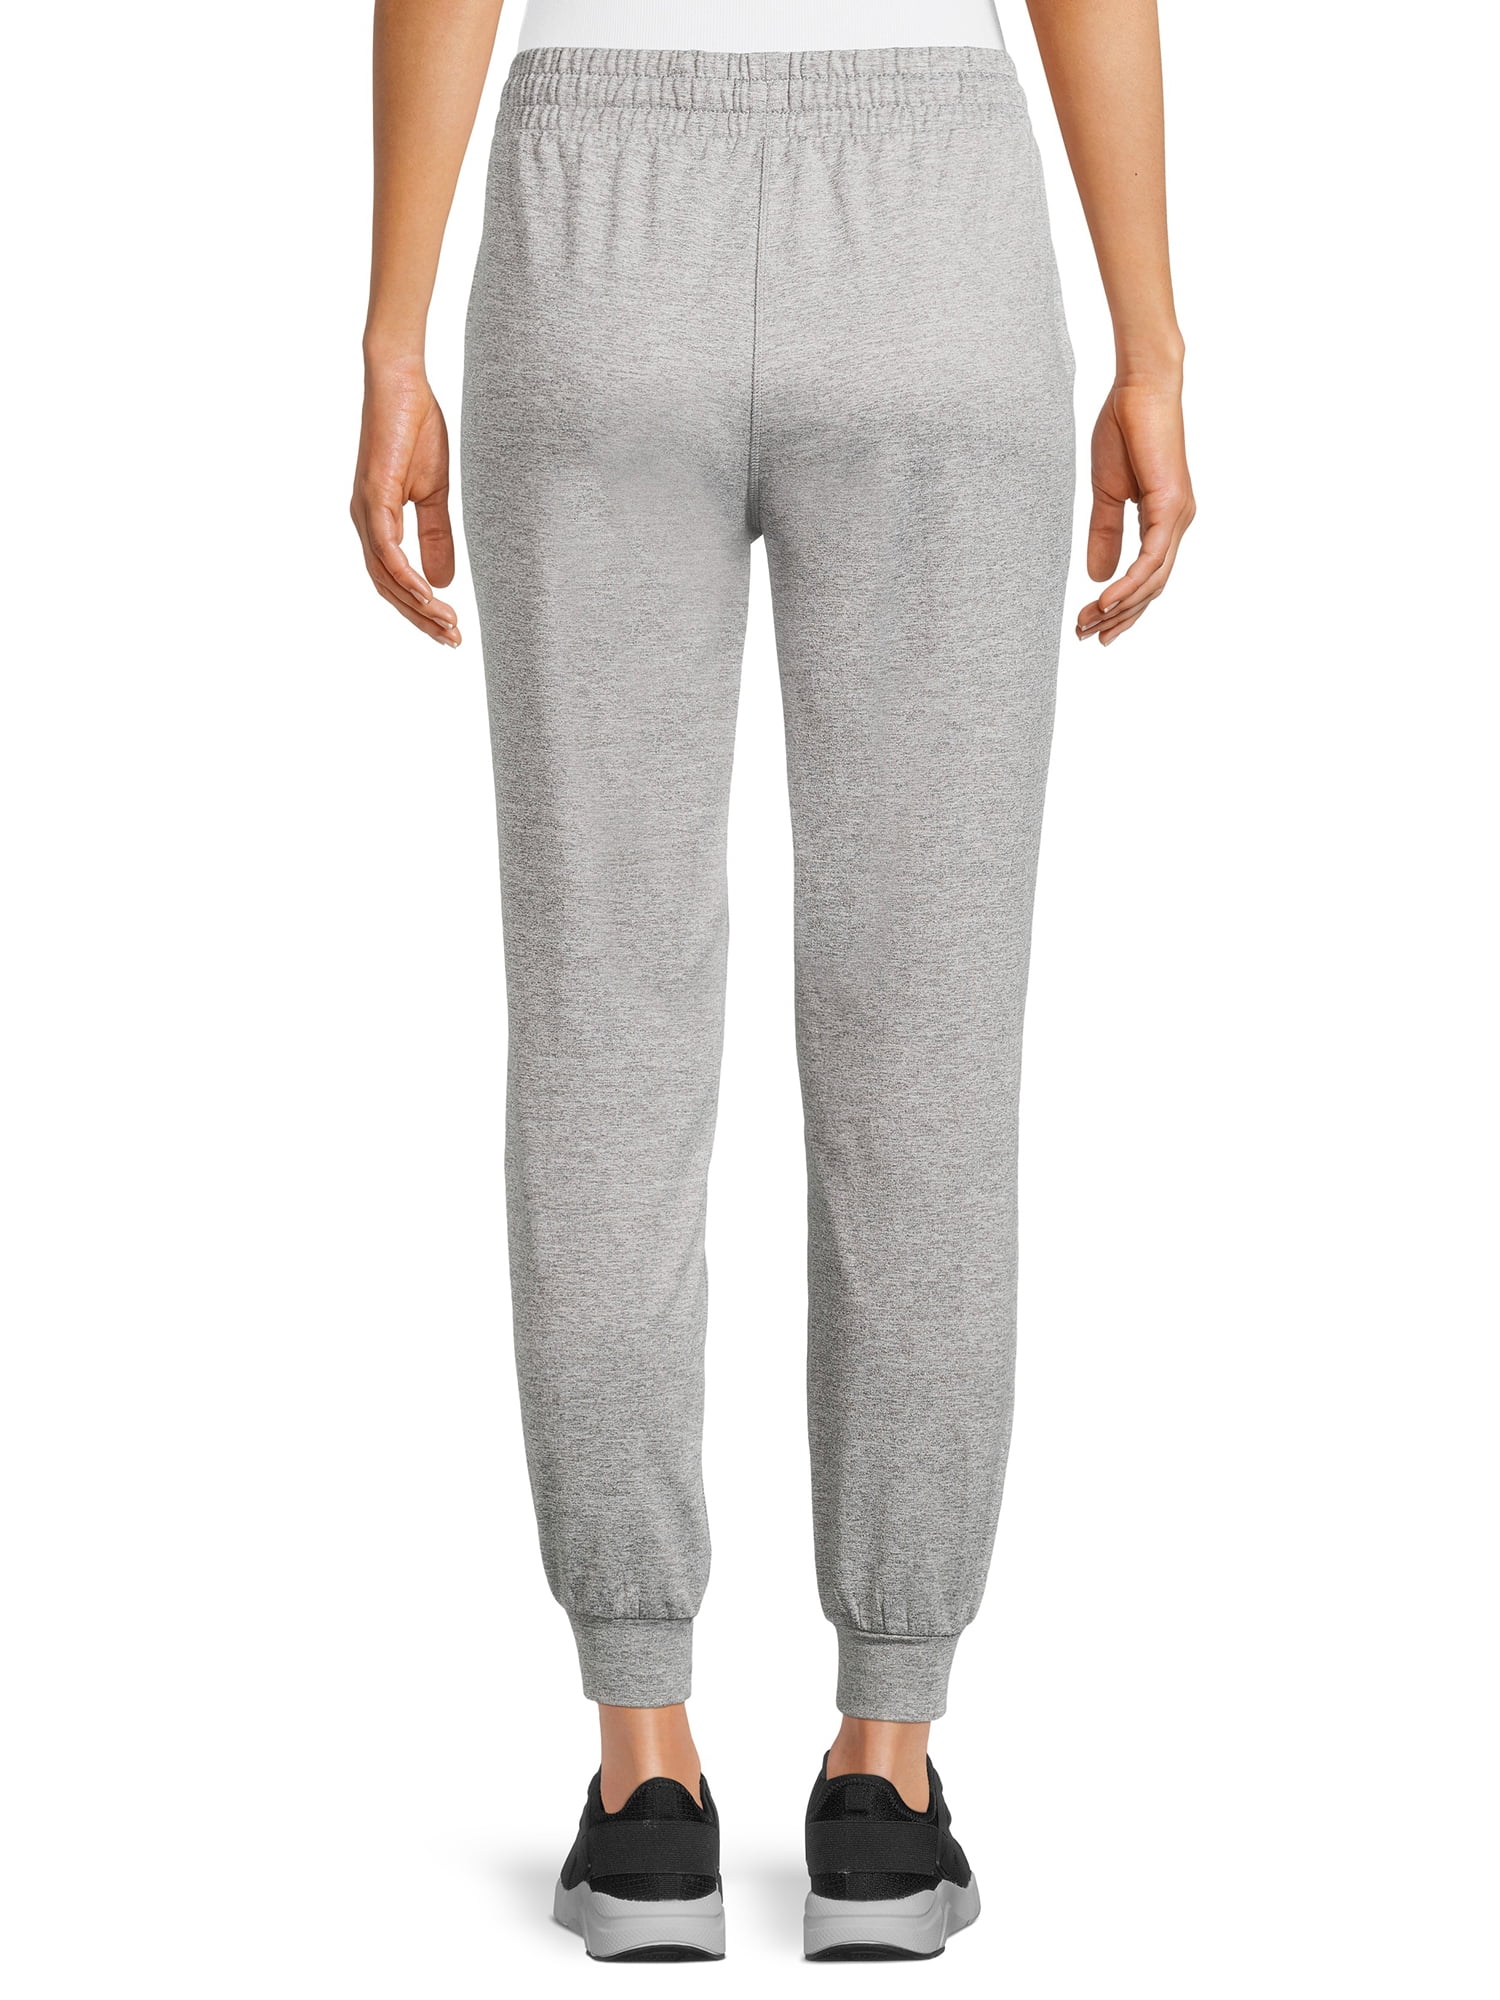 Athletic Works Women's Plus Super Soft Light Weight Jogger 